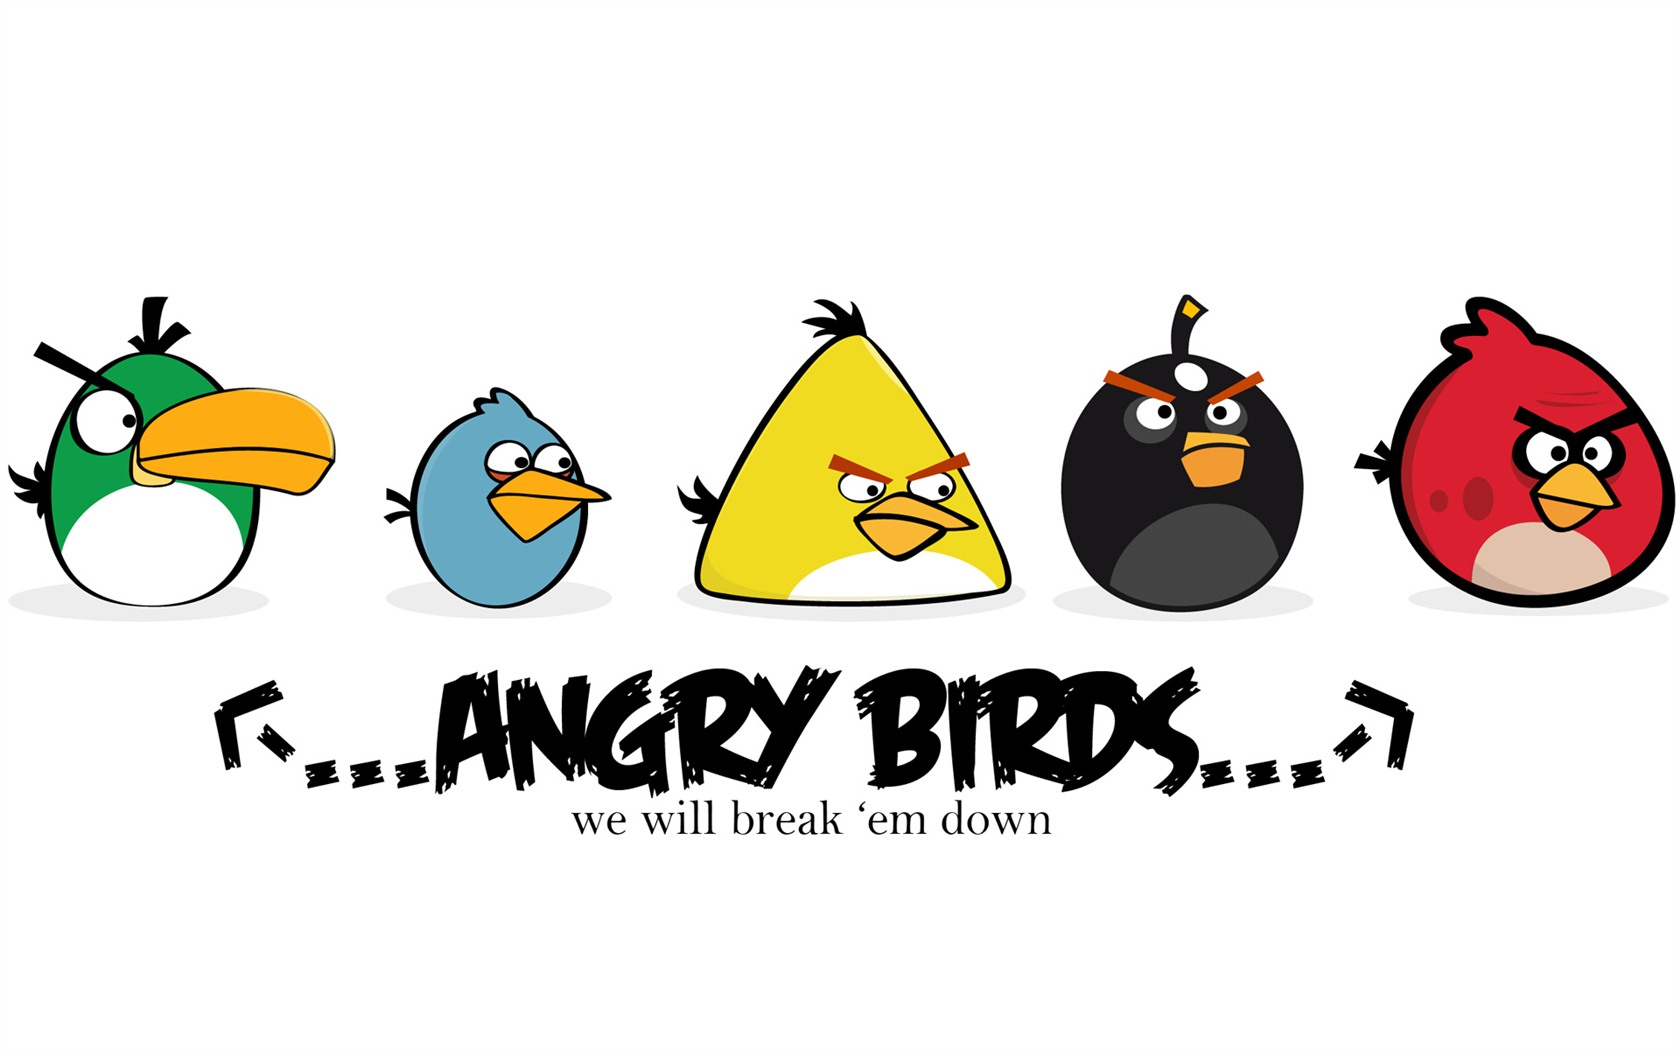 Angry Birds Game Wallpapers #2 - 1680x1050